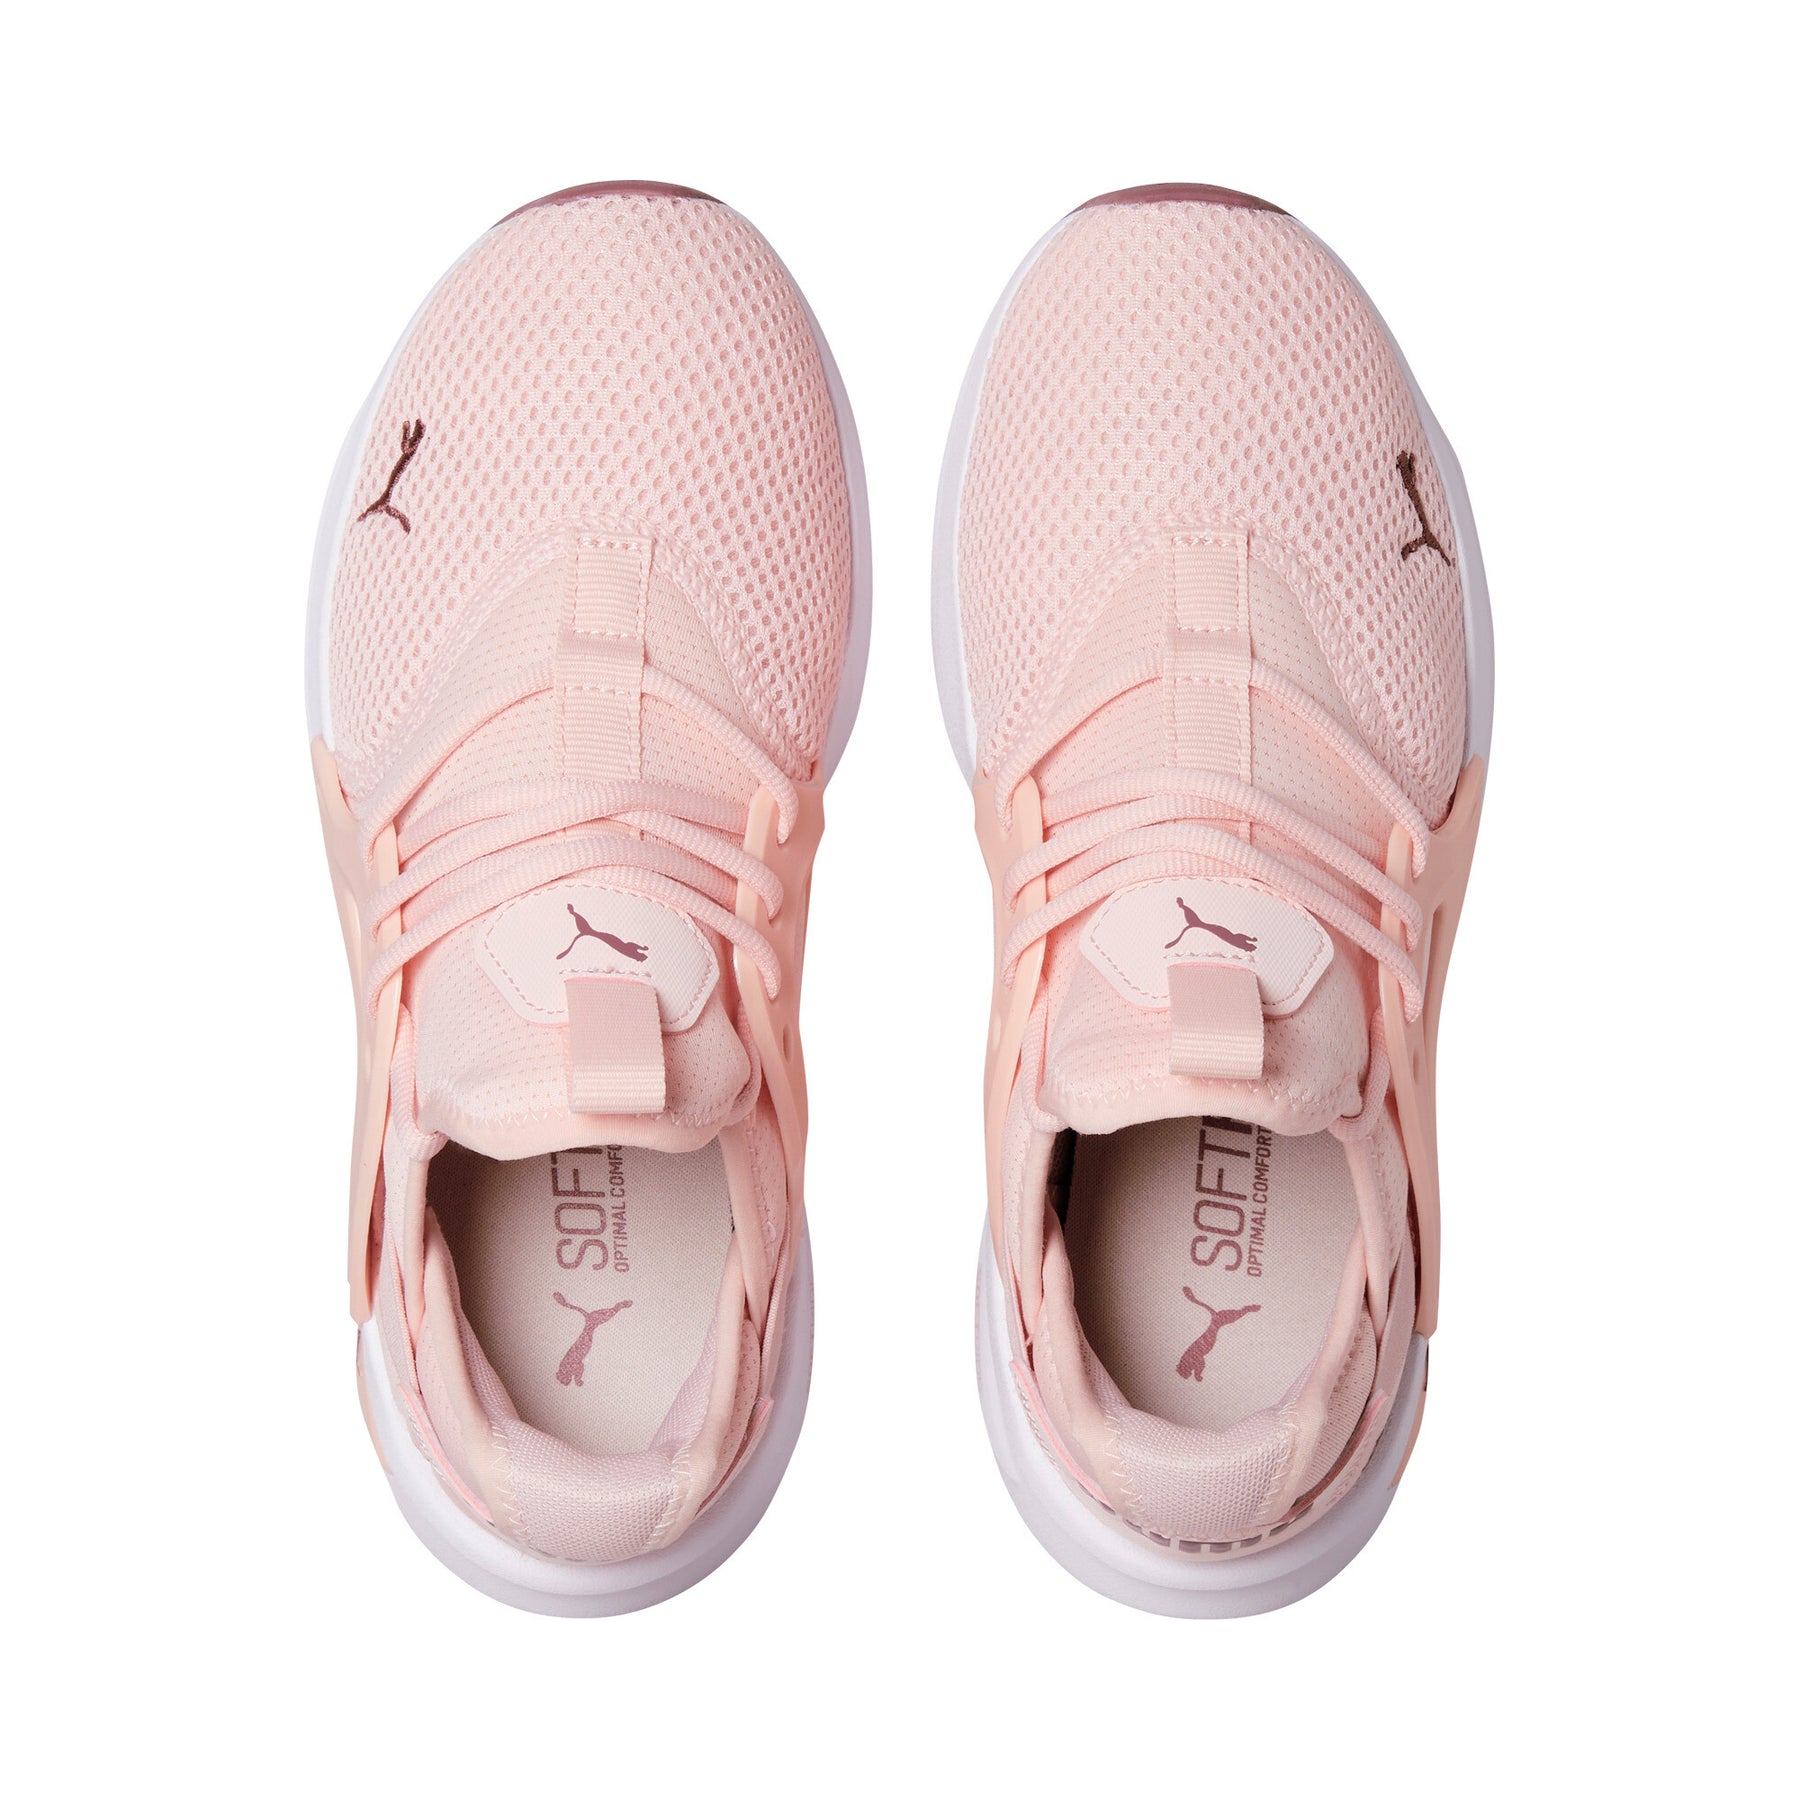 Puma Women's Softride Enzo Evo Running Shoes | Shop Premium Outlets